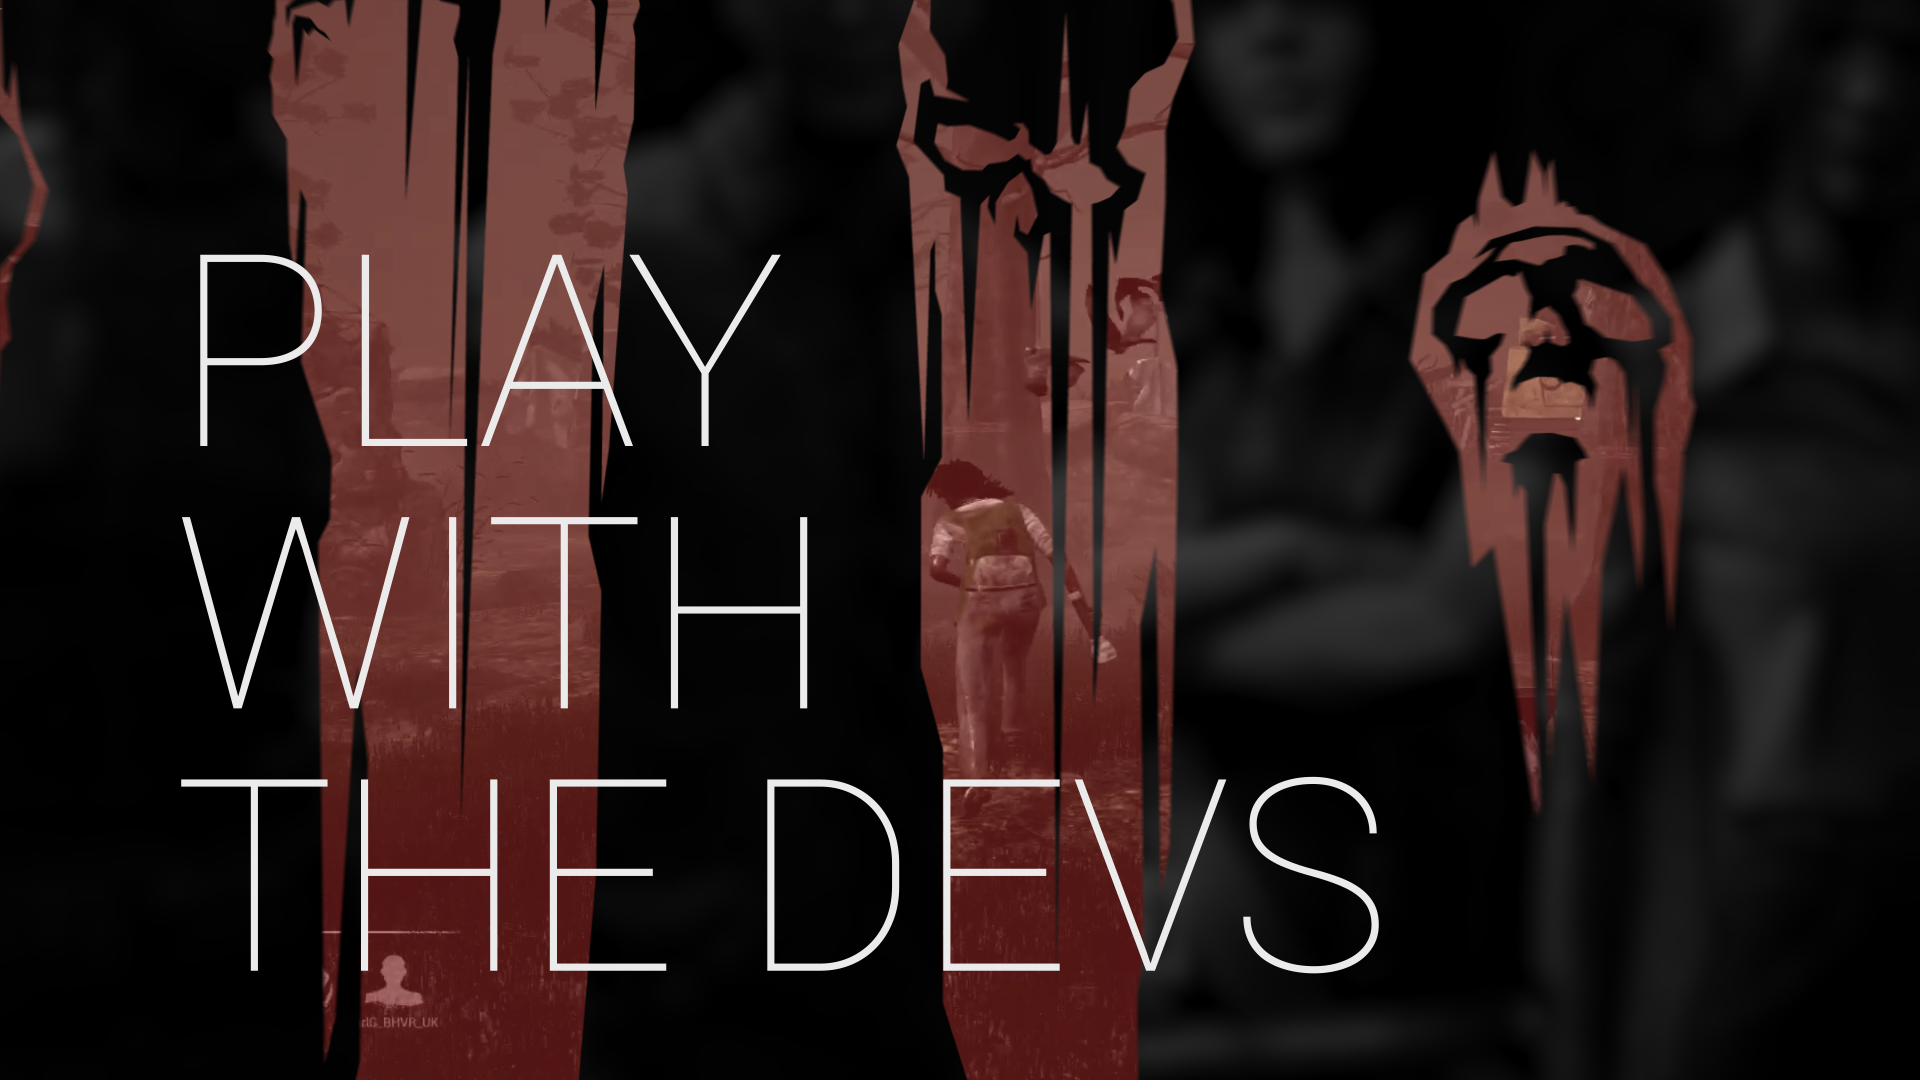 Dead By Daylight Livestream Play With The Devs Steam News